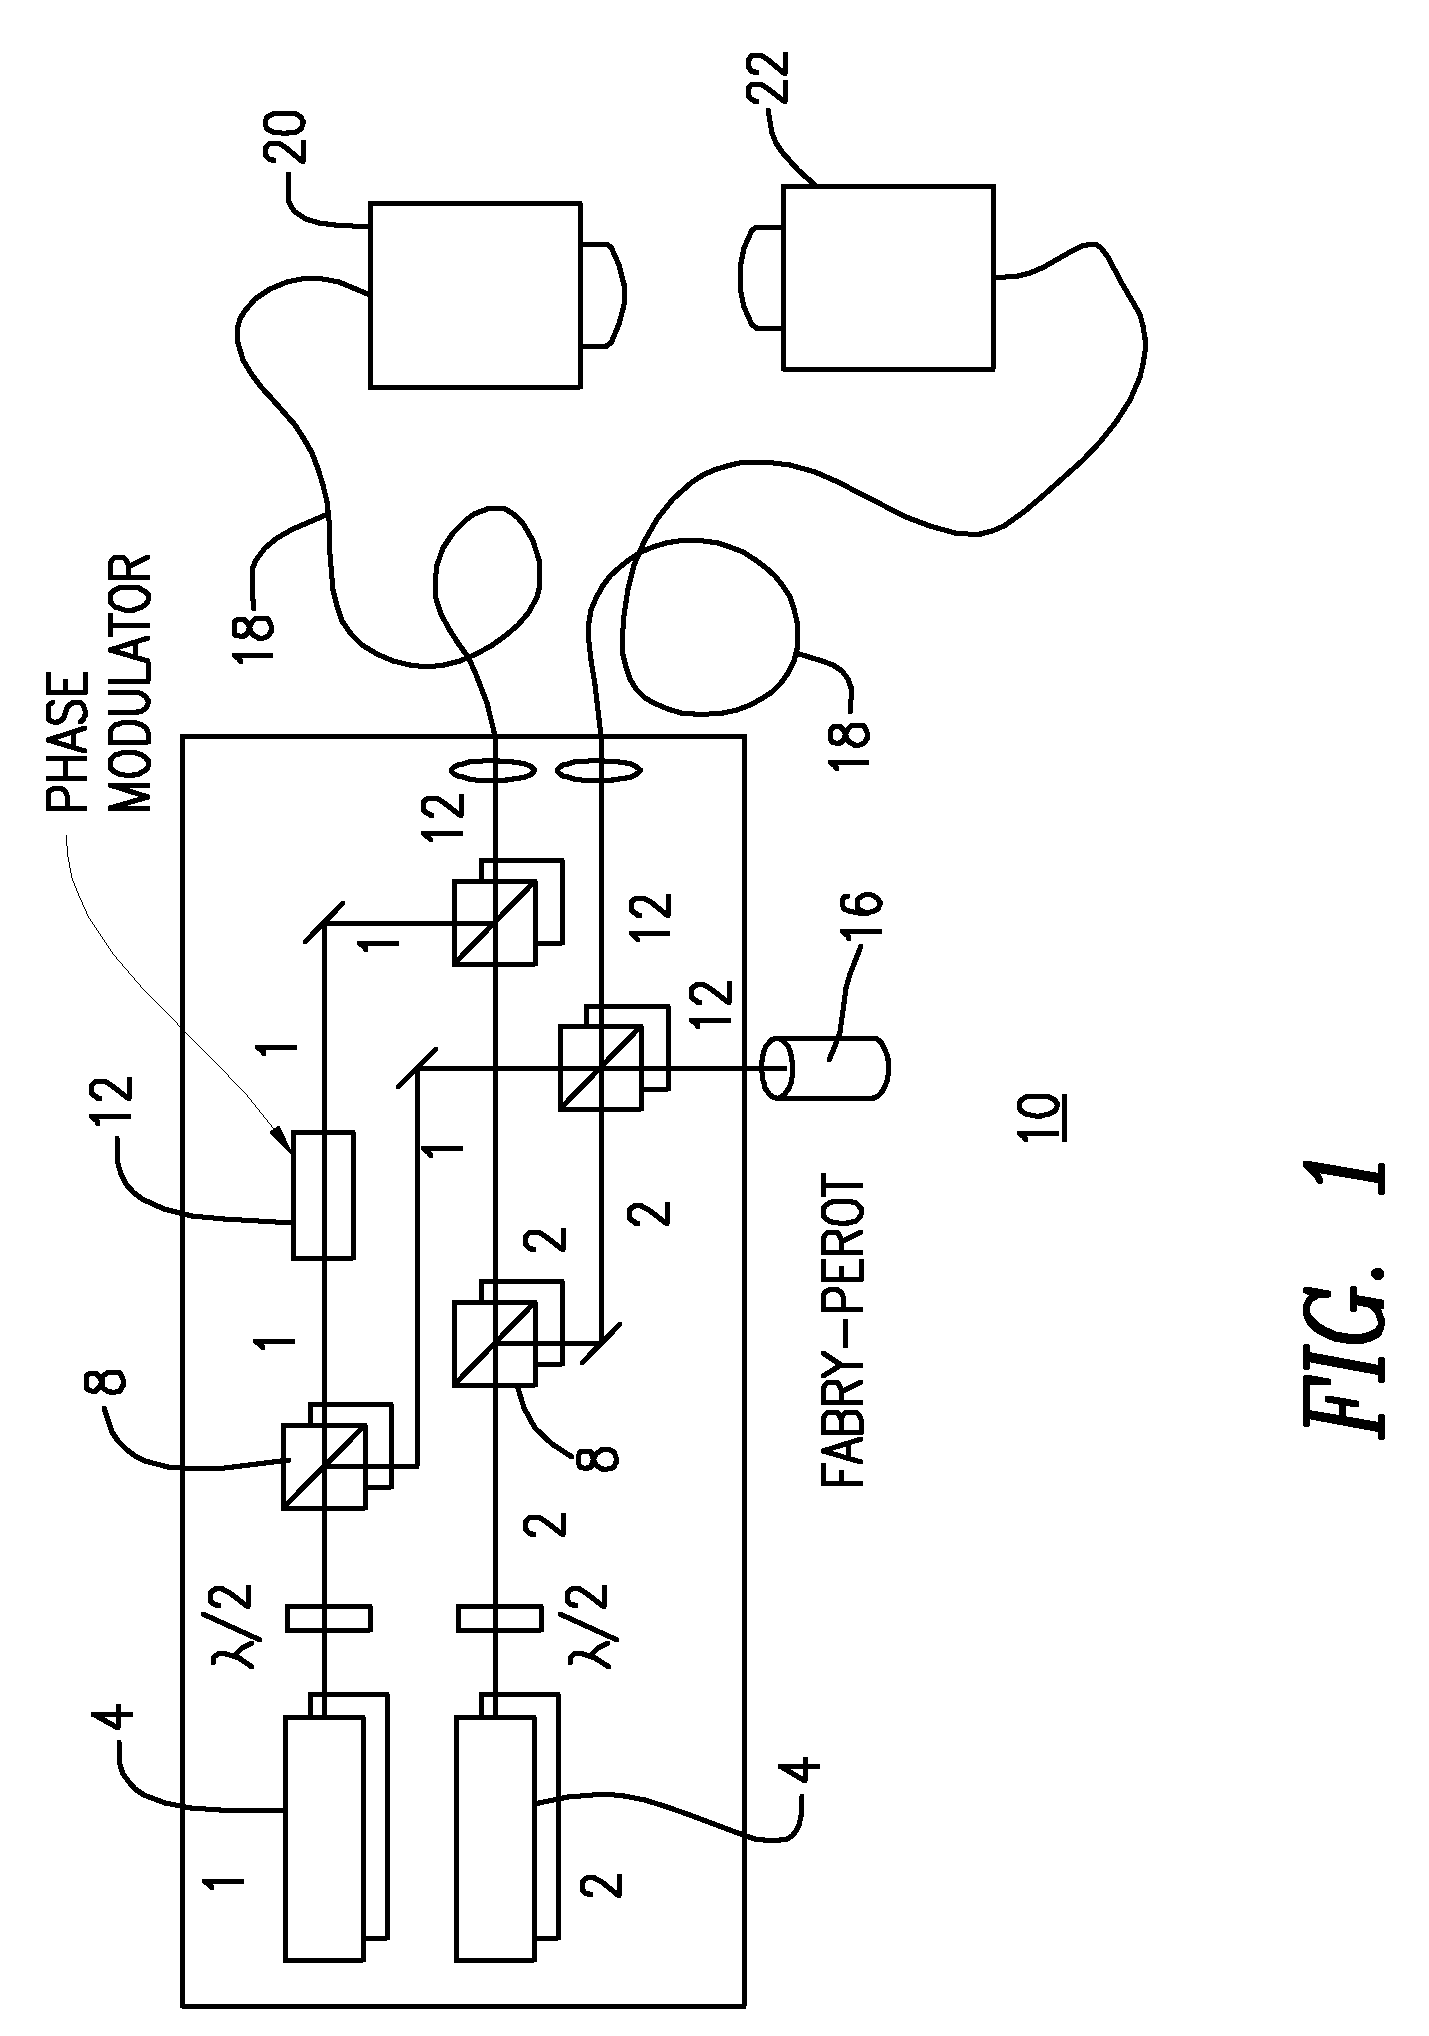 Methods and apparatus for rapid scanning continuous wave terahertz spectroscopy and imaging